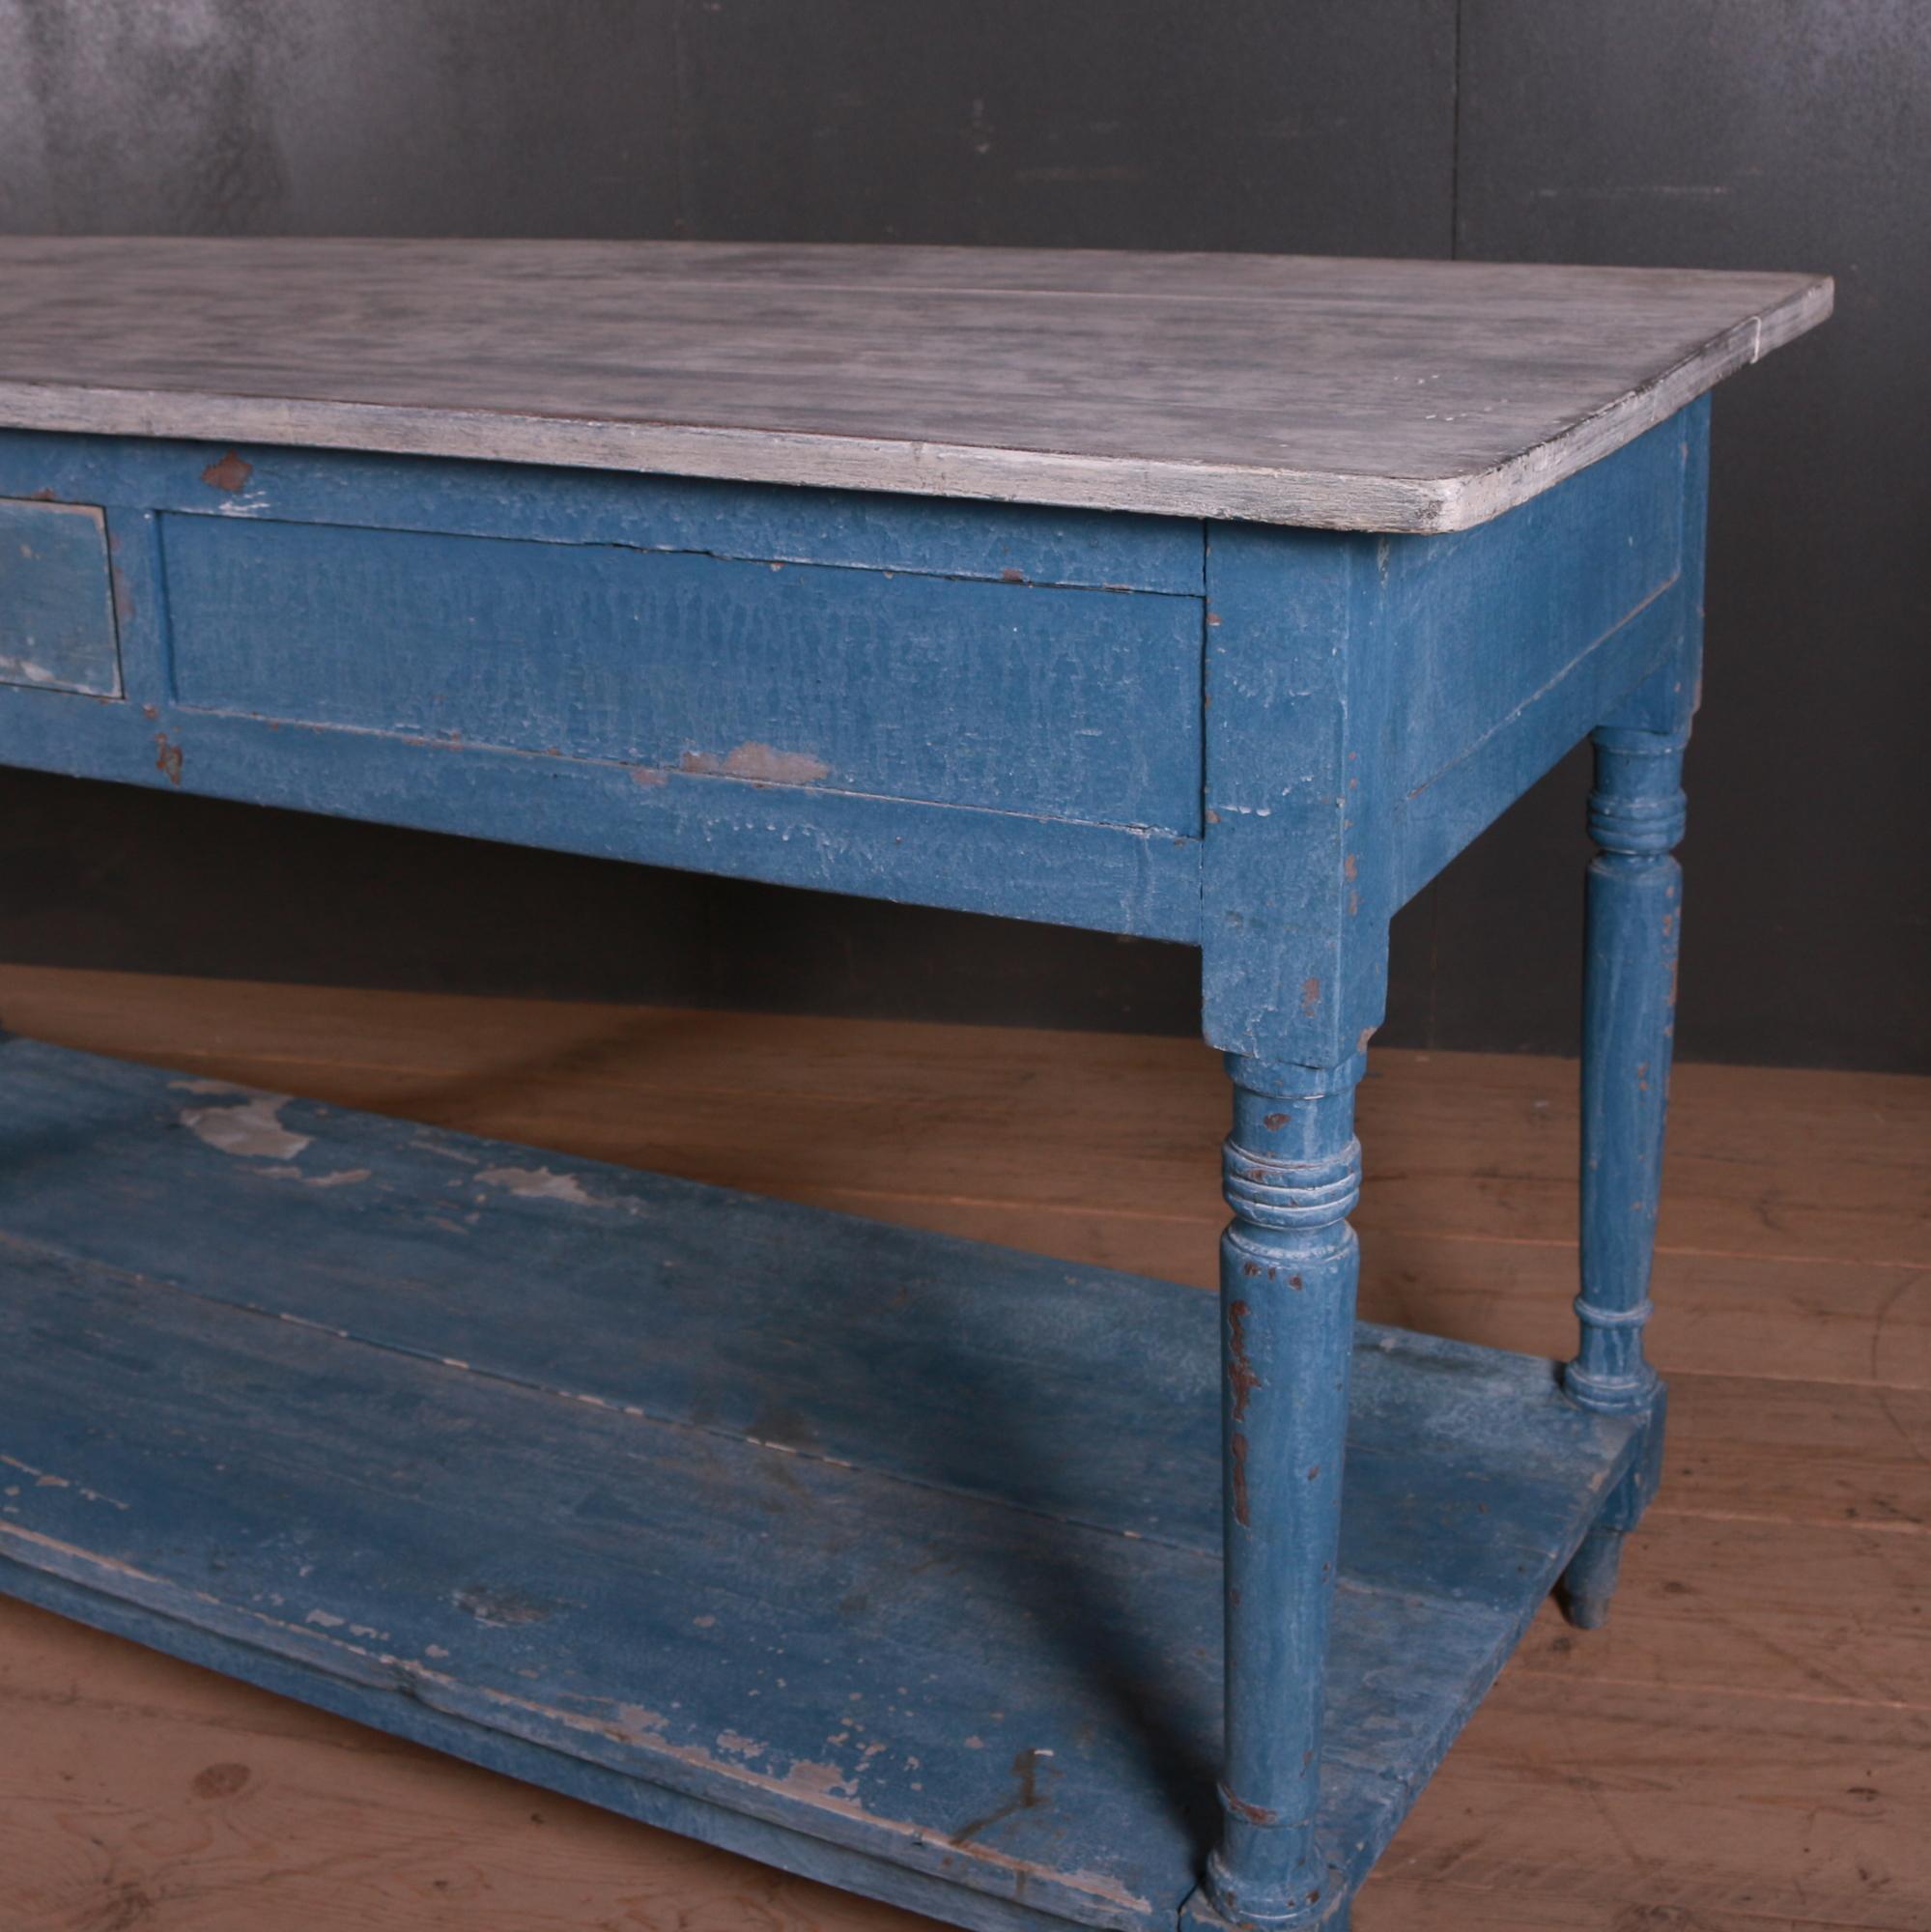 Large 19th century French oak painted drapers table, 1820.

Dimensions
123 inches (312 cms) wide
26 inches (66 cms) deep
35 inches (89 cms) high.